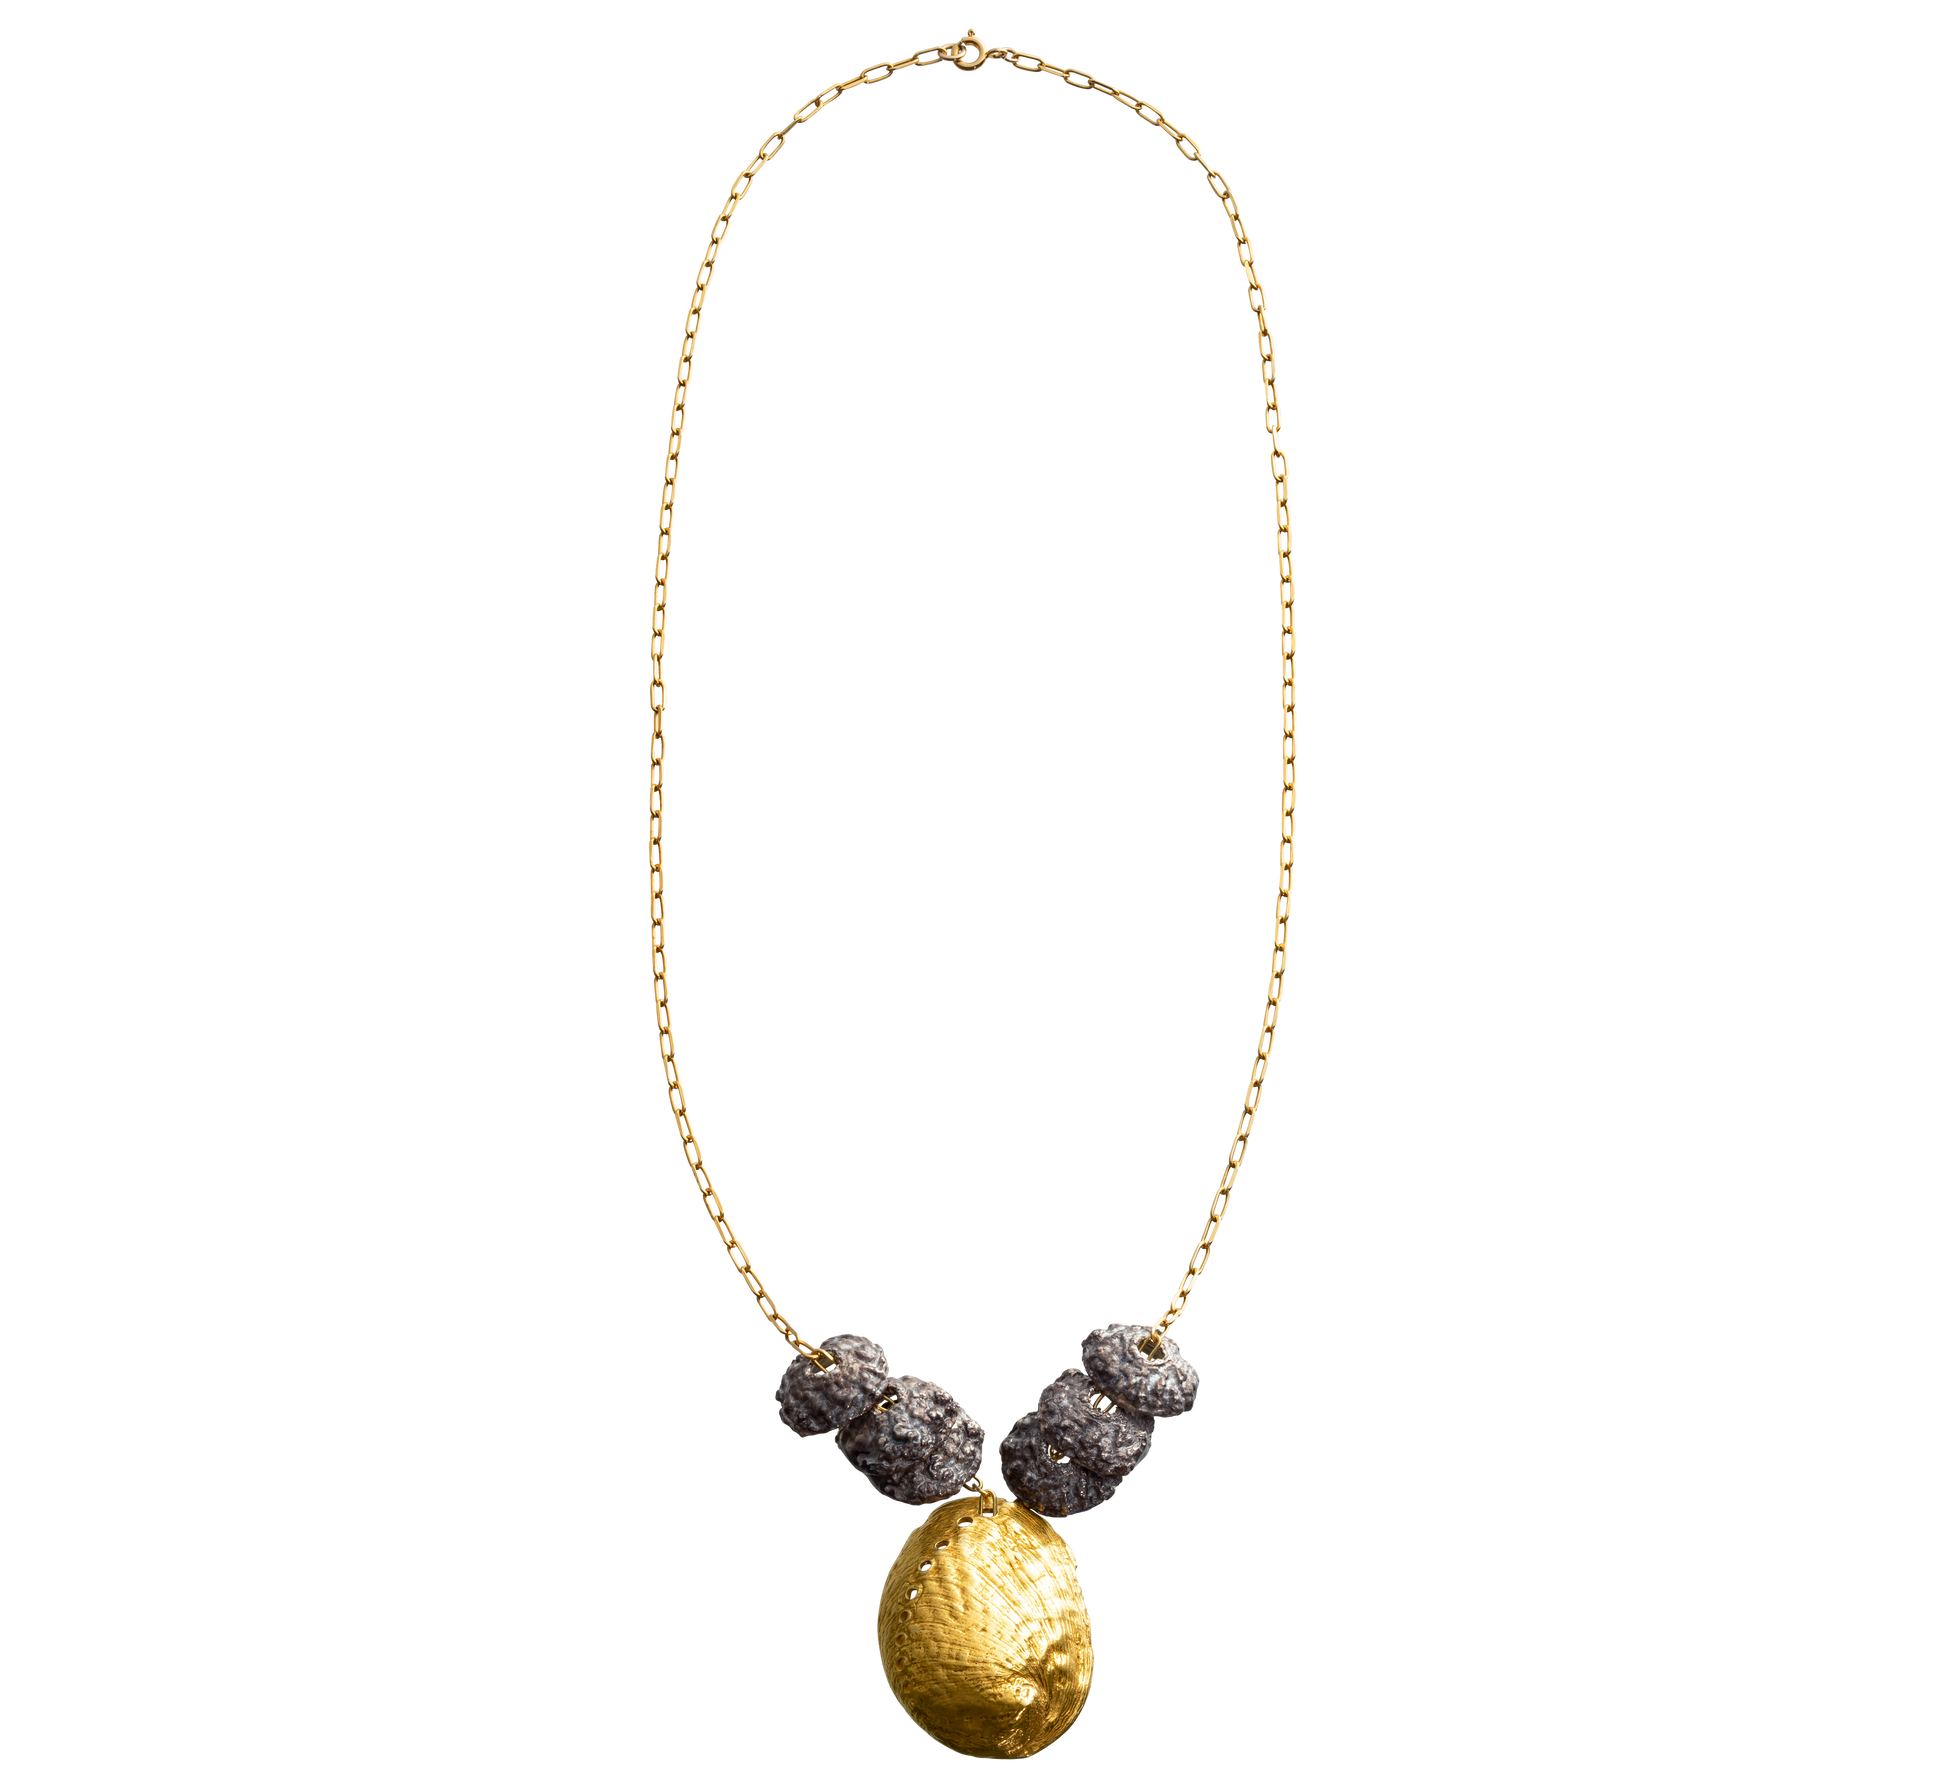 A sterling silver and gold vermeil necklace made from casts of eucalyptus seed caps and an abalone shell. Made by Violette Stehli